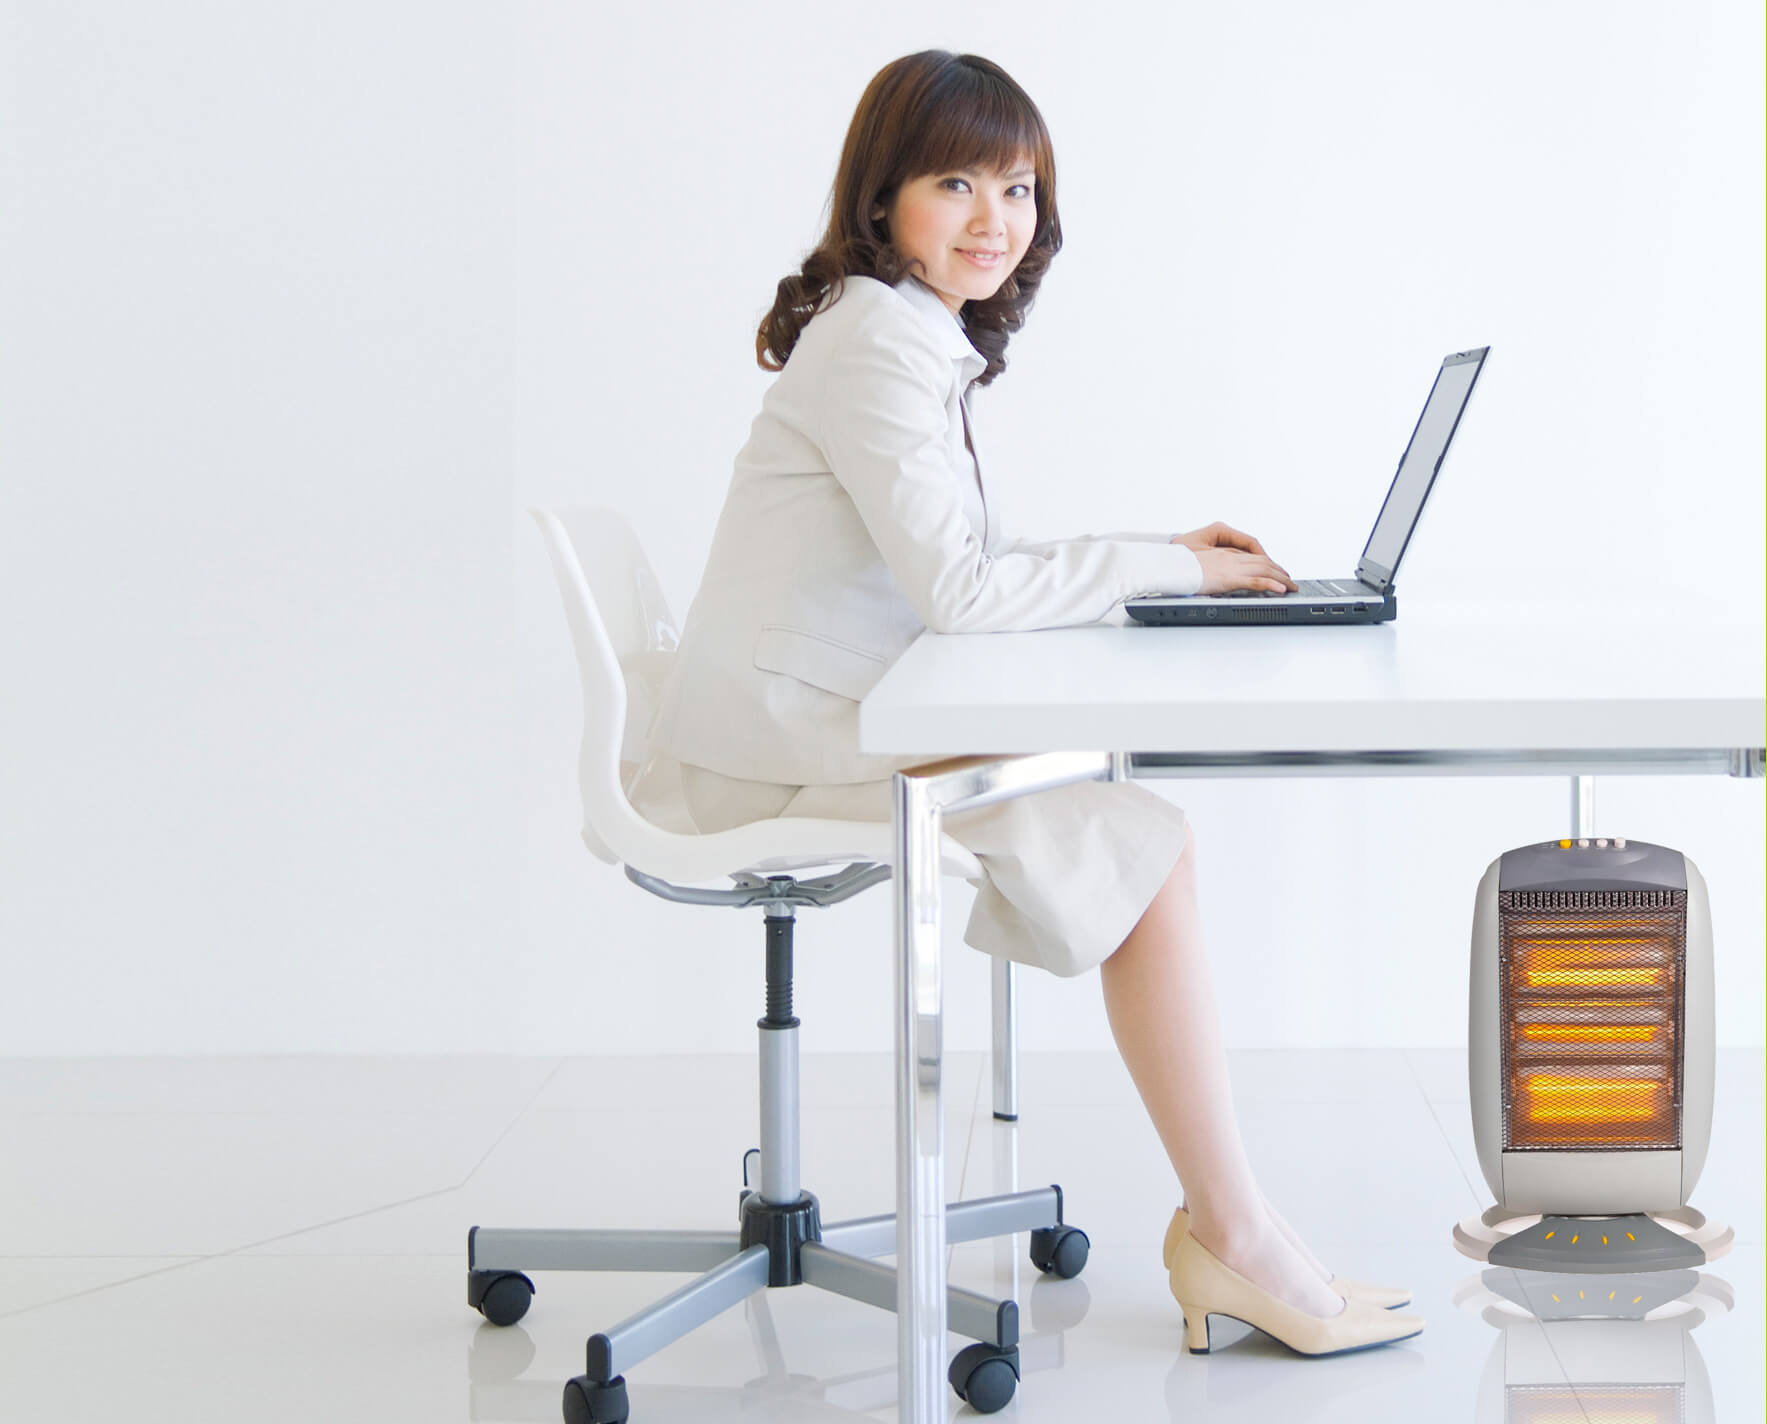 Should You Allow Space Heaters at Work? - The Severn Group